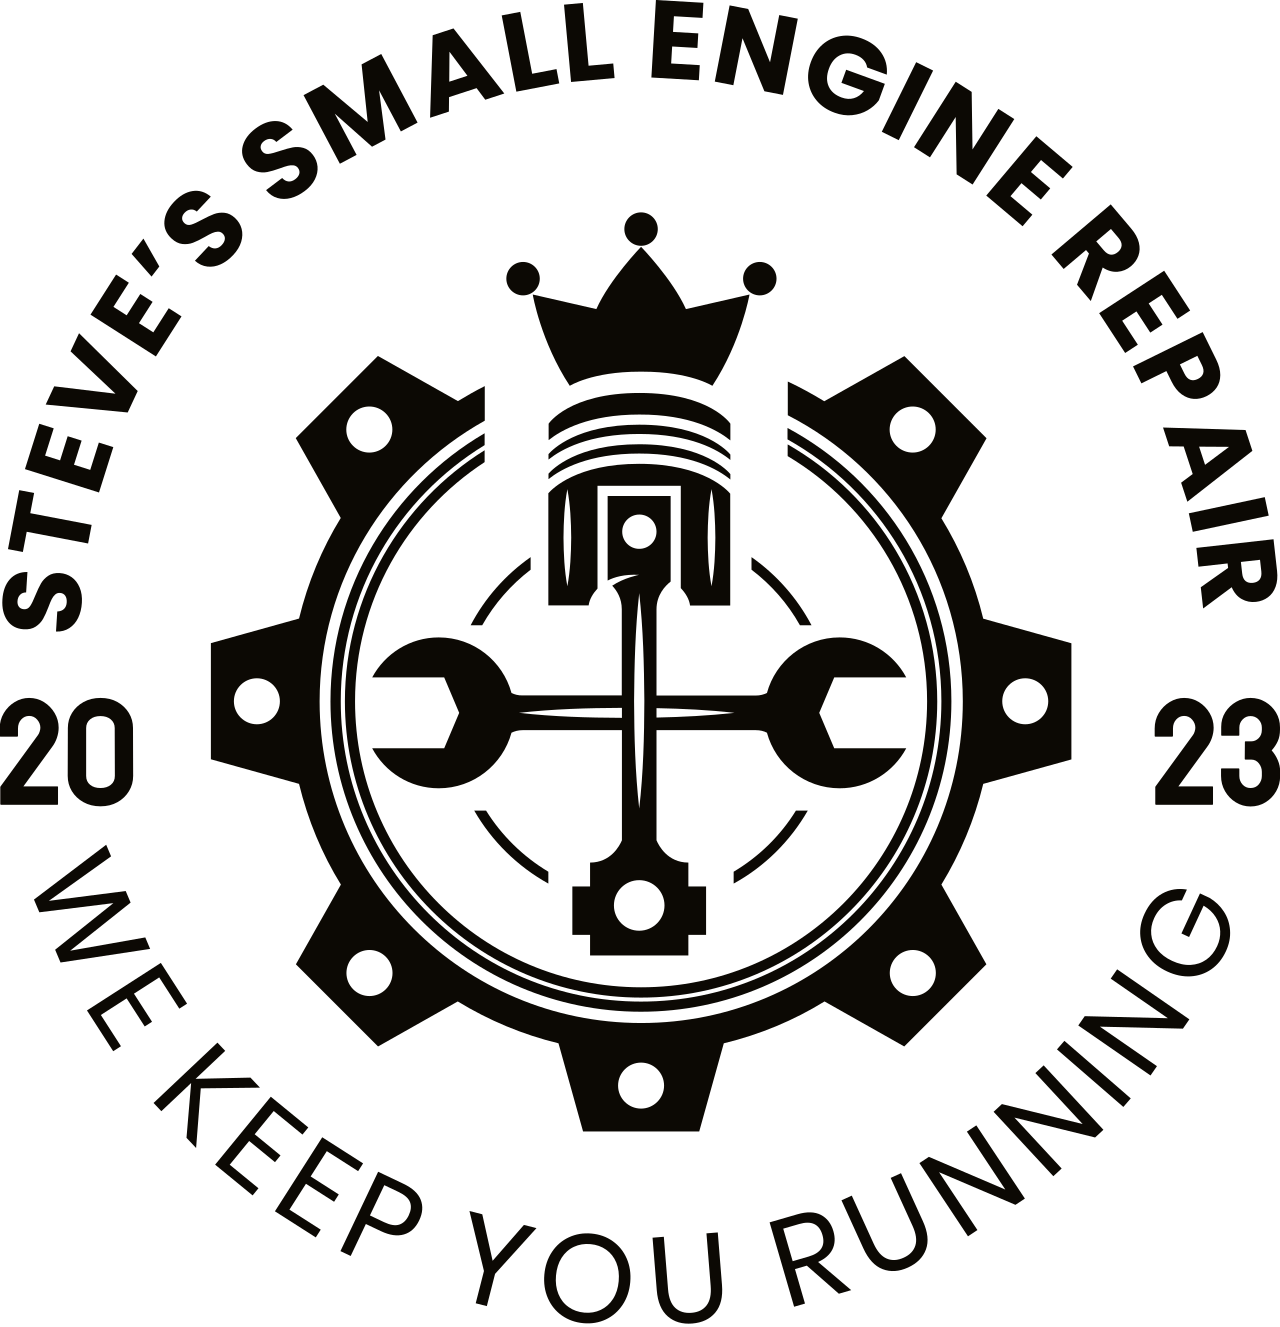 STEVE’S SMALL ENGINE REPAIR 's web page